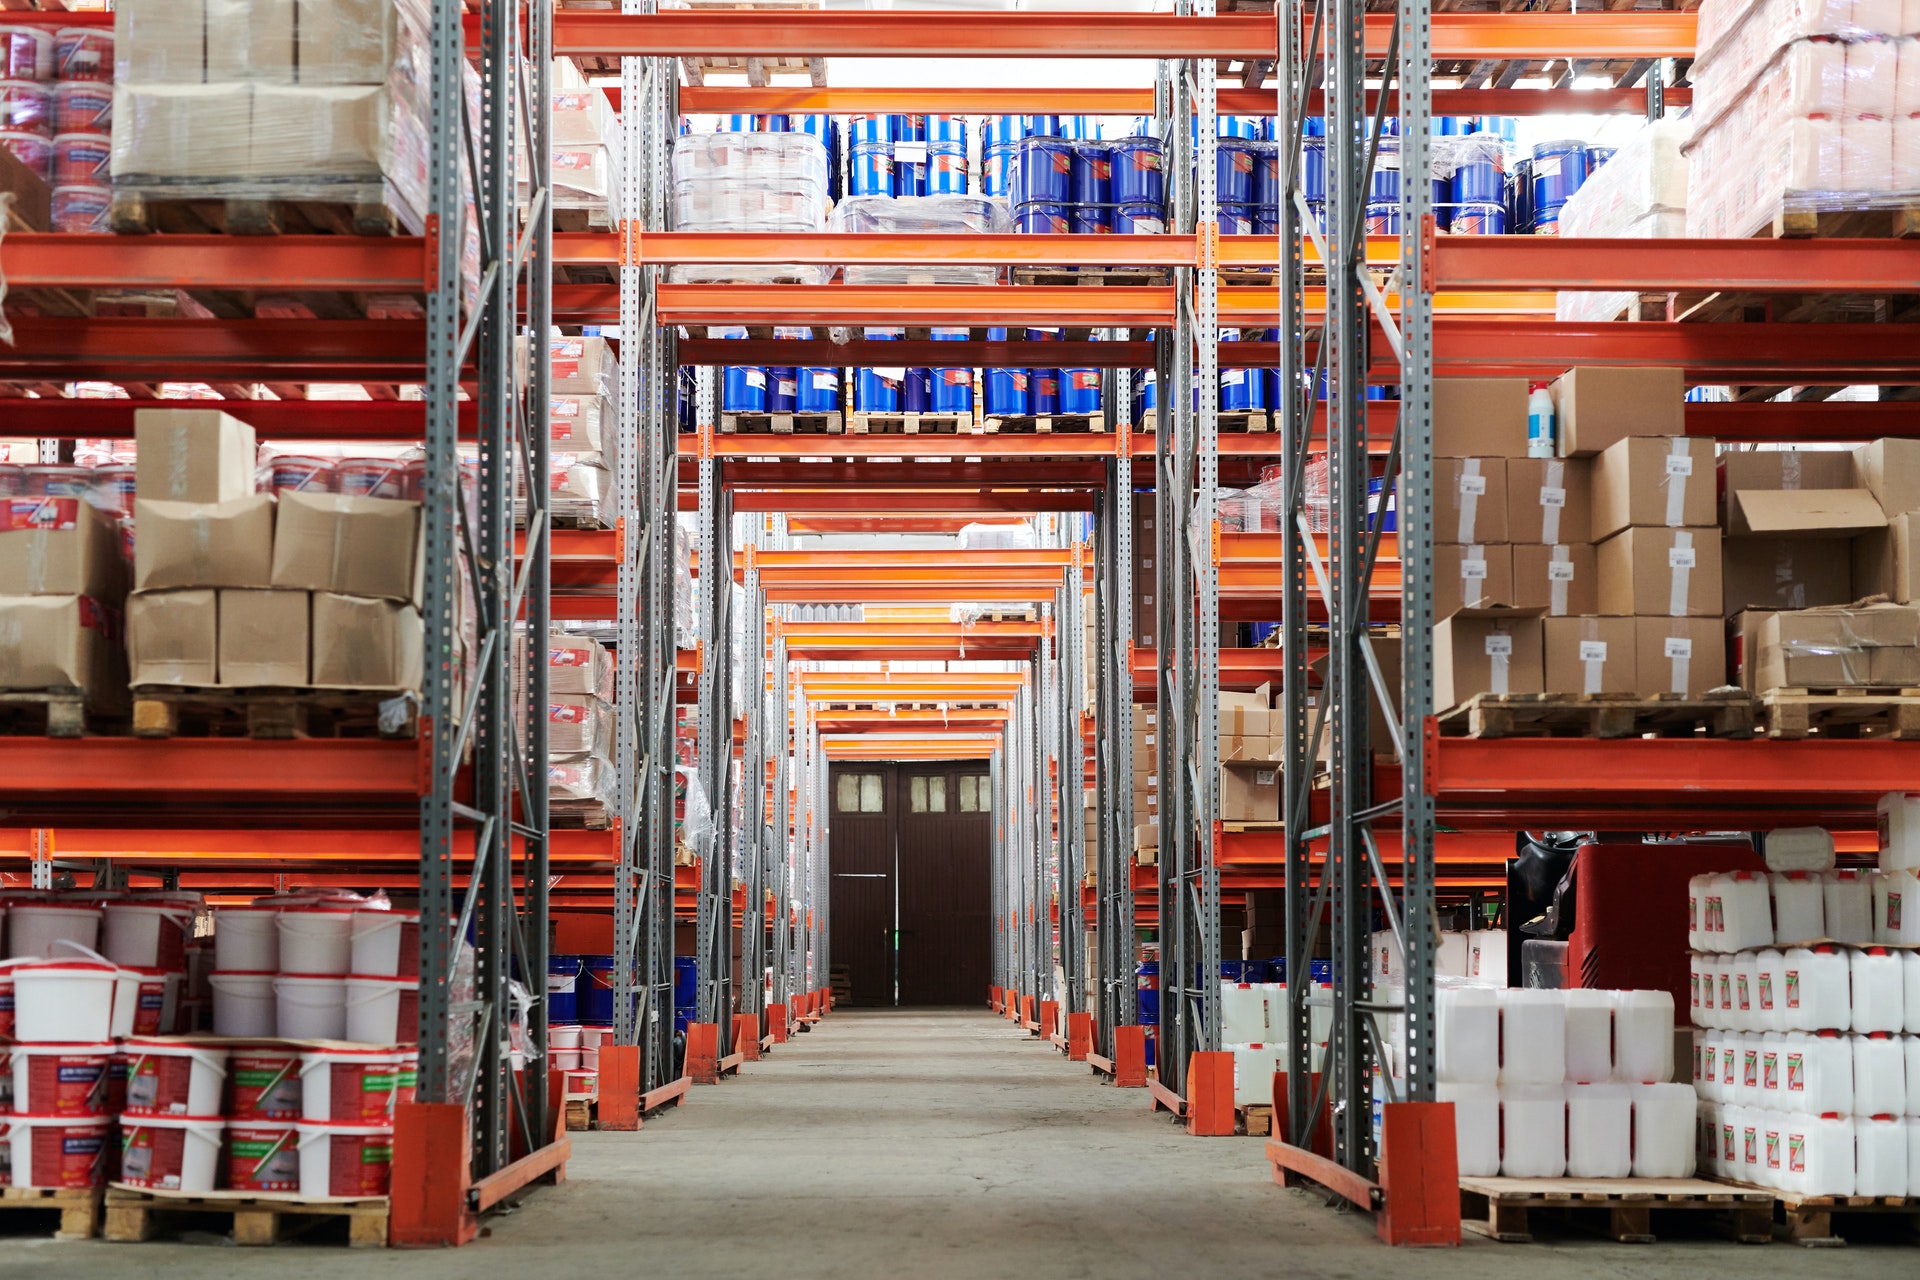 4 Inventory Planning Techniques Every SMB Needs to Know